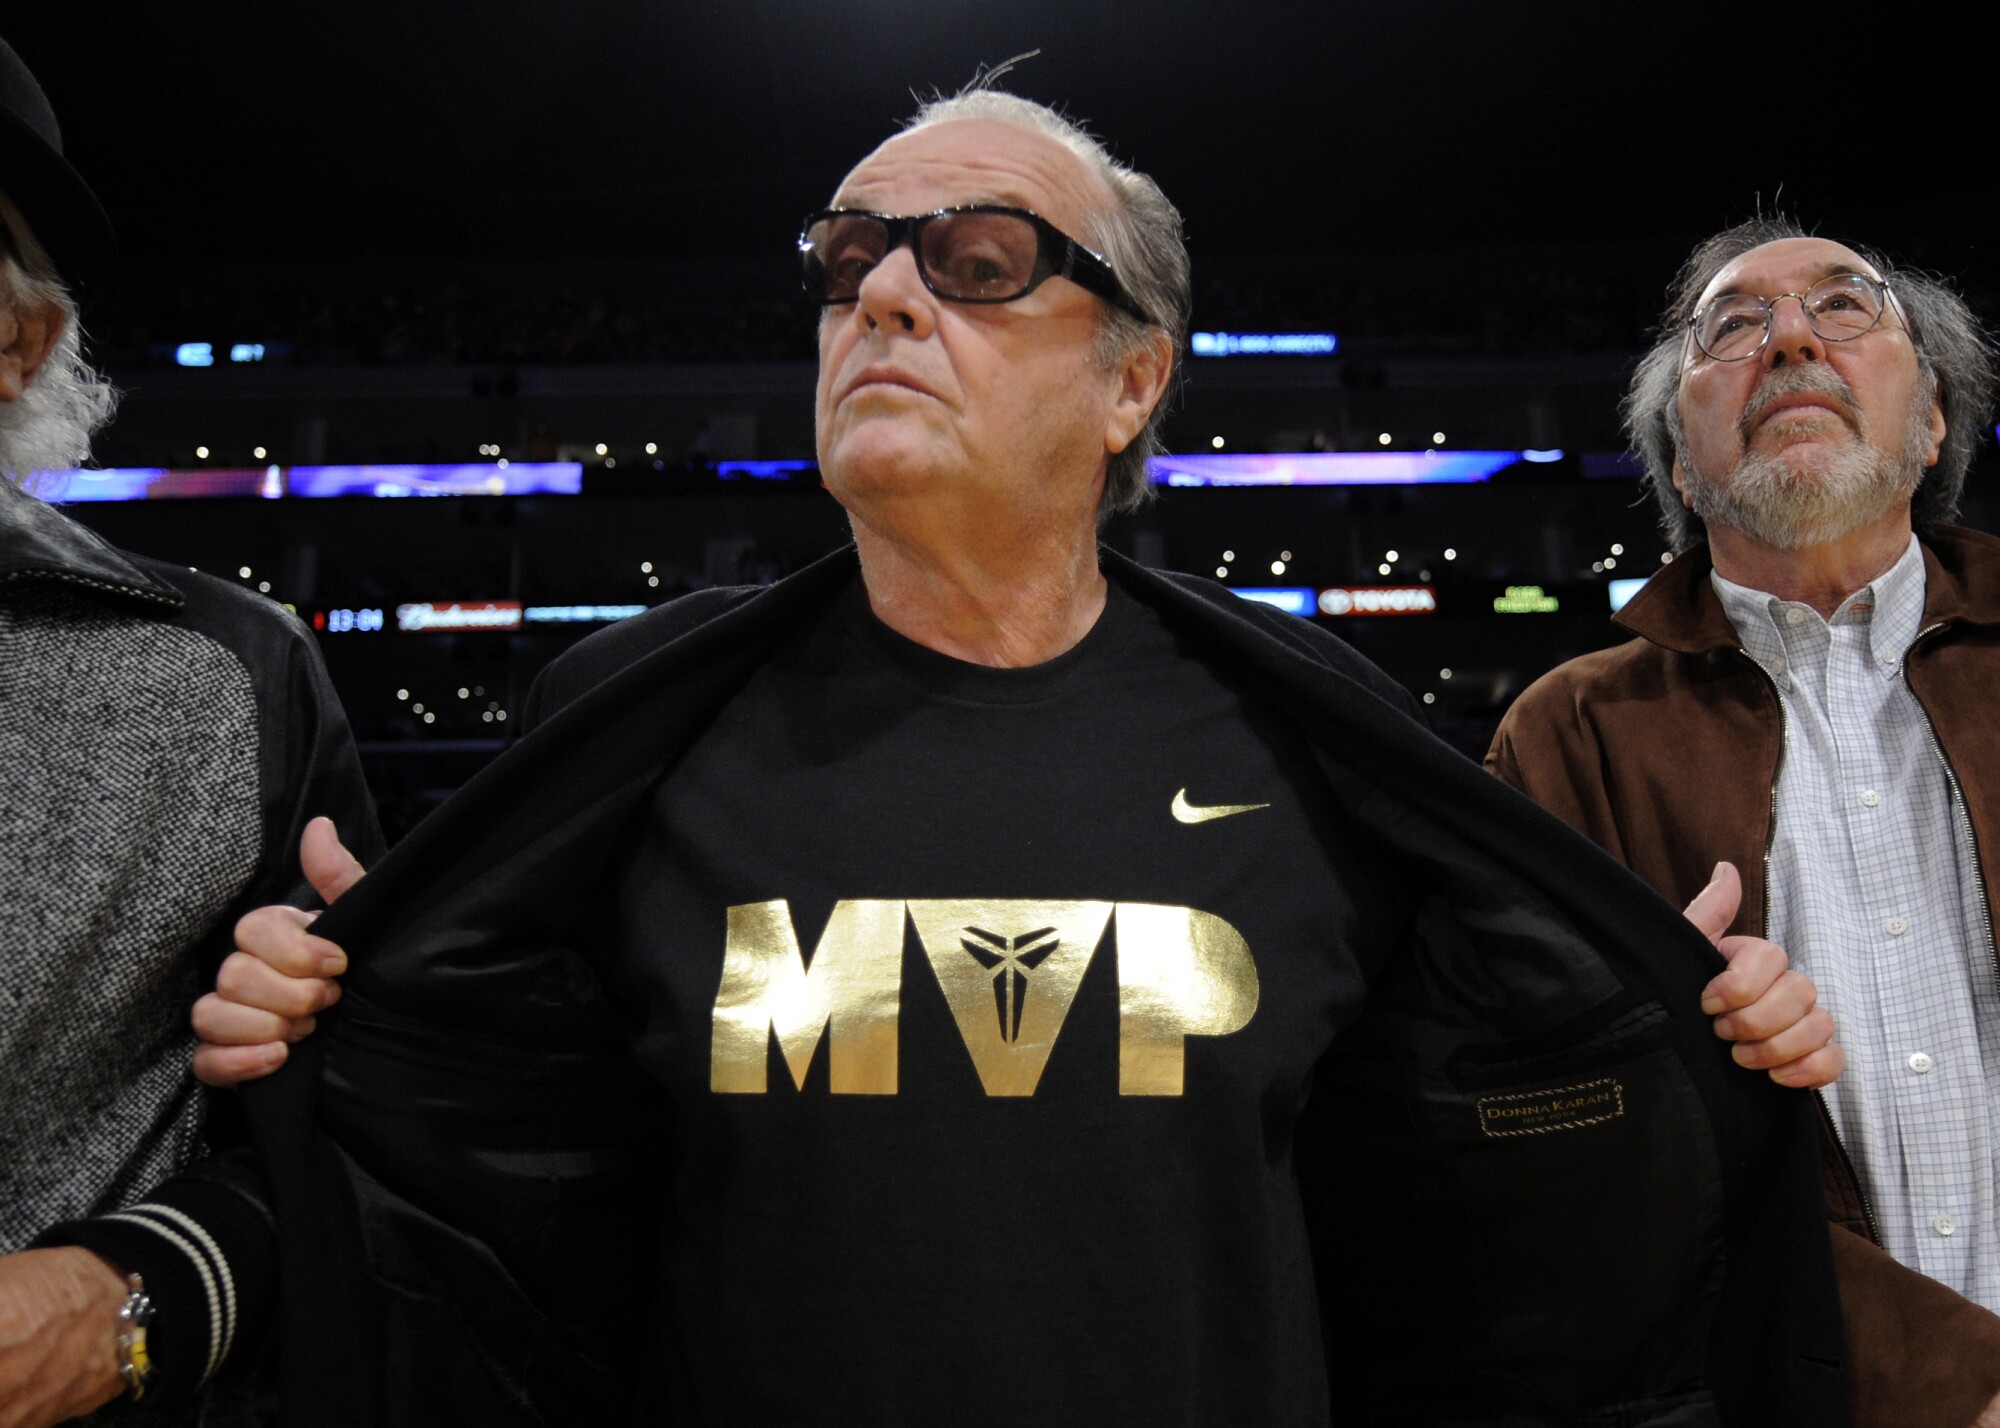 Actor Jack Nicholson shows off his MVP shirt during a playoff game between the Lakers and Utah Jazz on May 7, 2008.